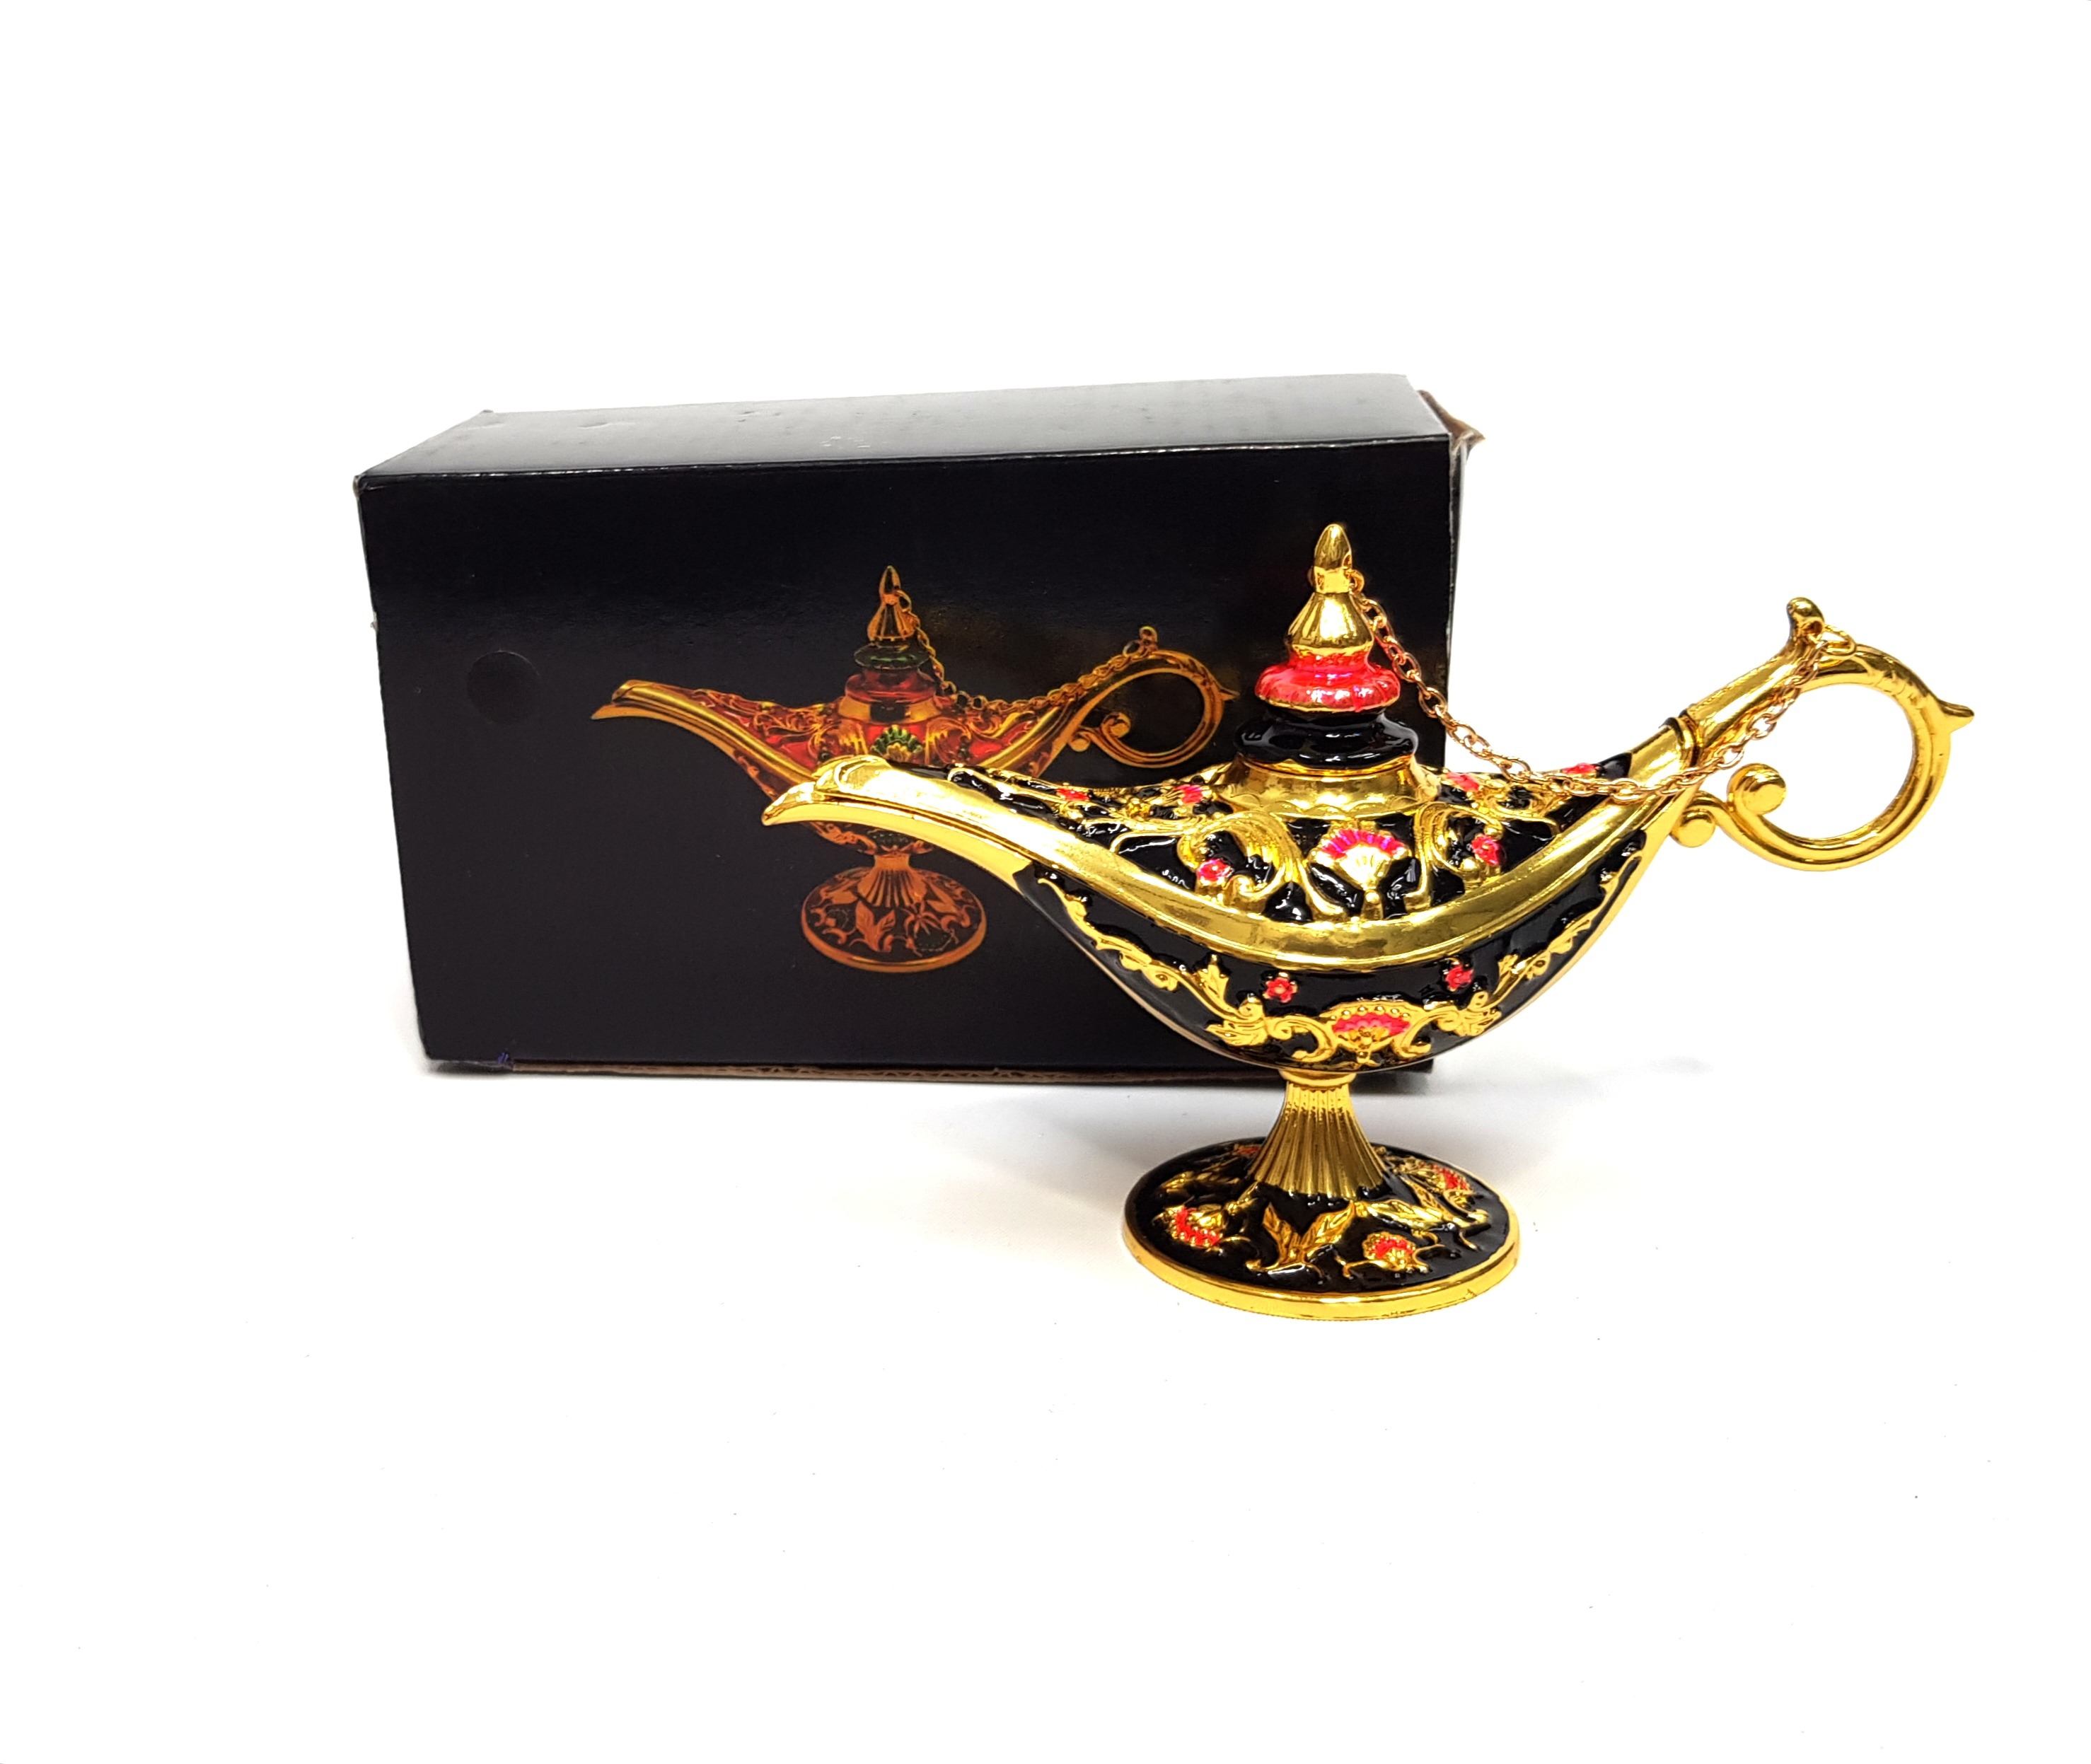 Luxury Classic Vintage Collectable Rare Legend Aladdin Magic Genie Costume Lamp Home Table Decoration & Gift